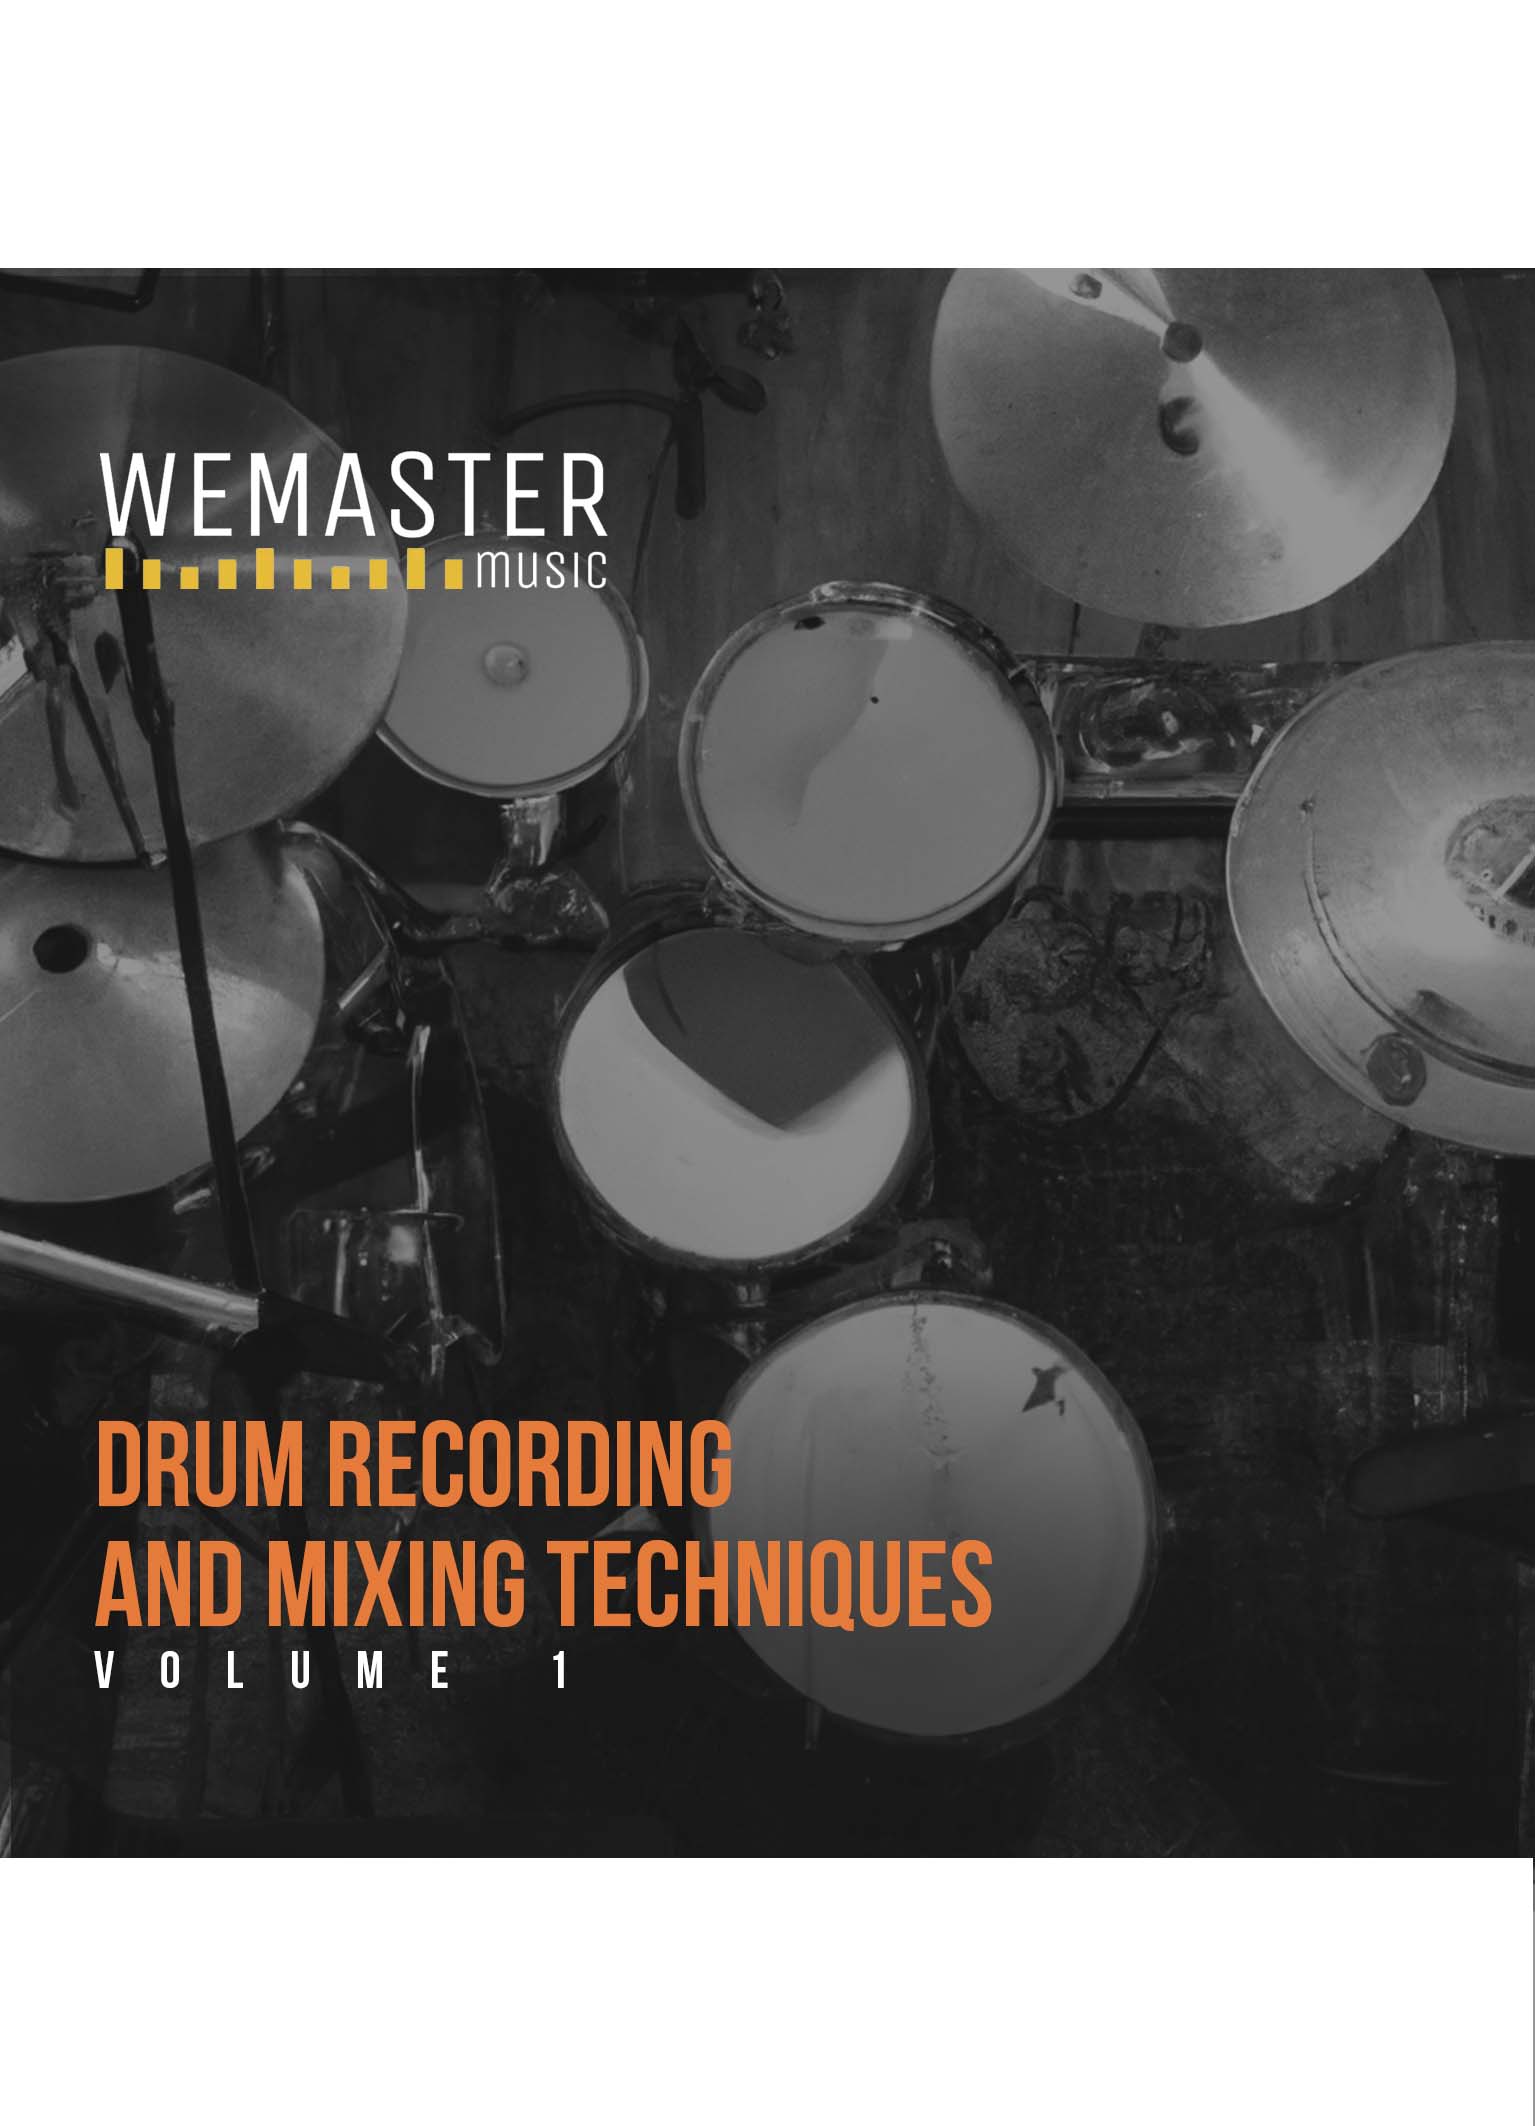 Drum Recording and Mixing Techniques - Volume 1